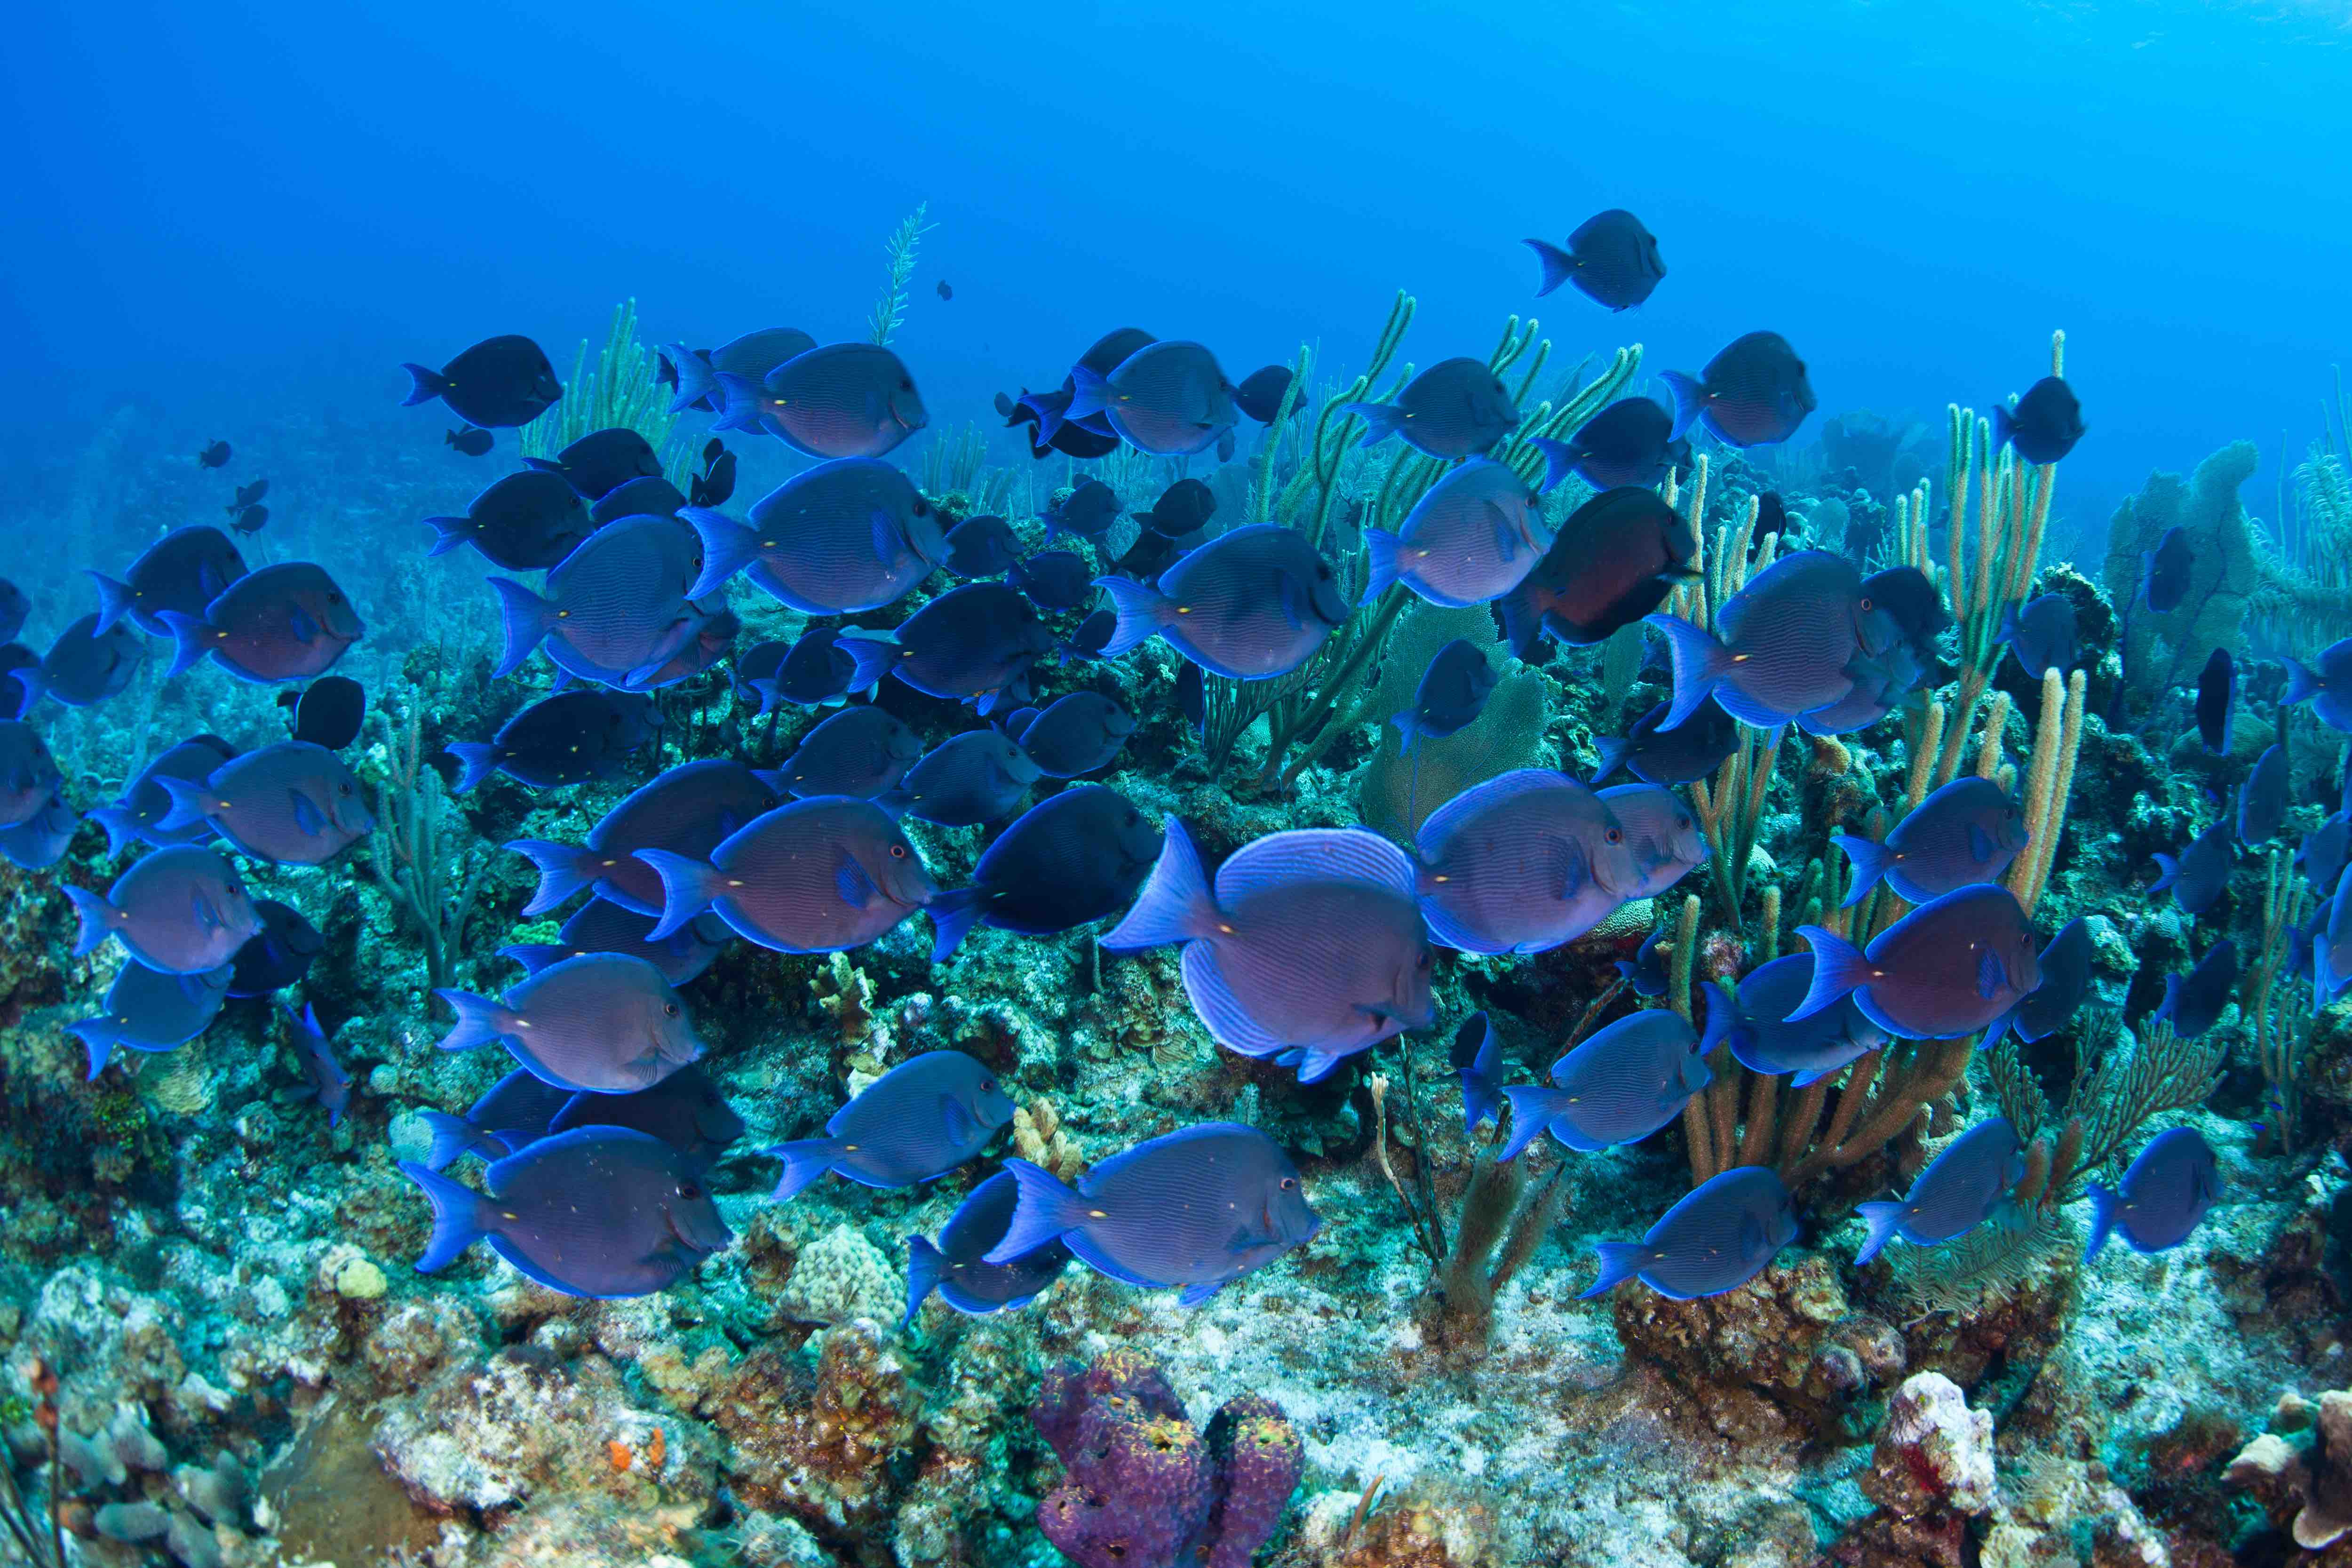 A school of Blue tang fish swim over a coral reef in Grand Cayman